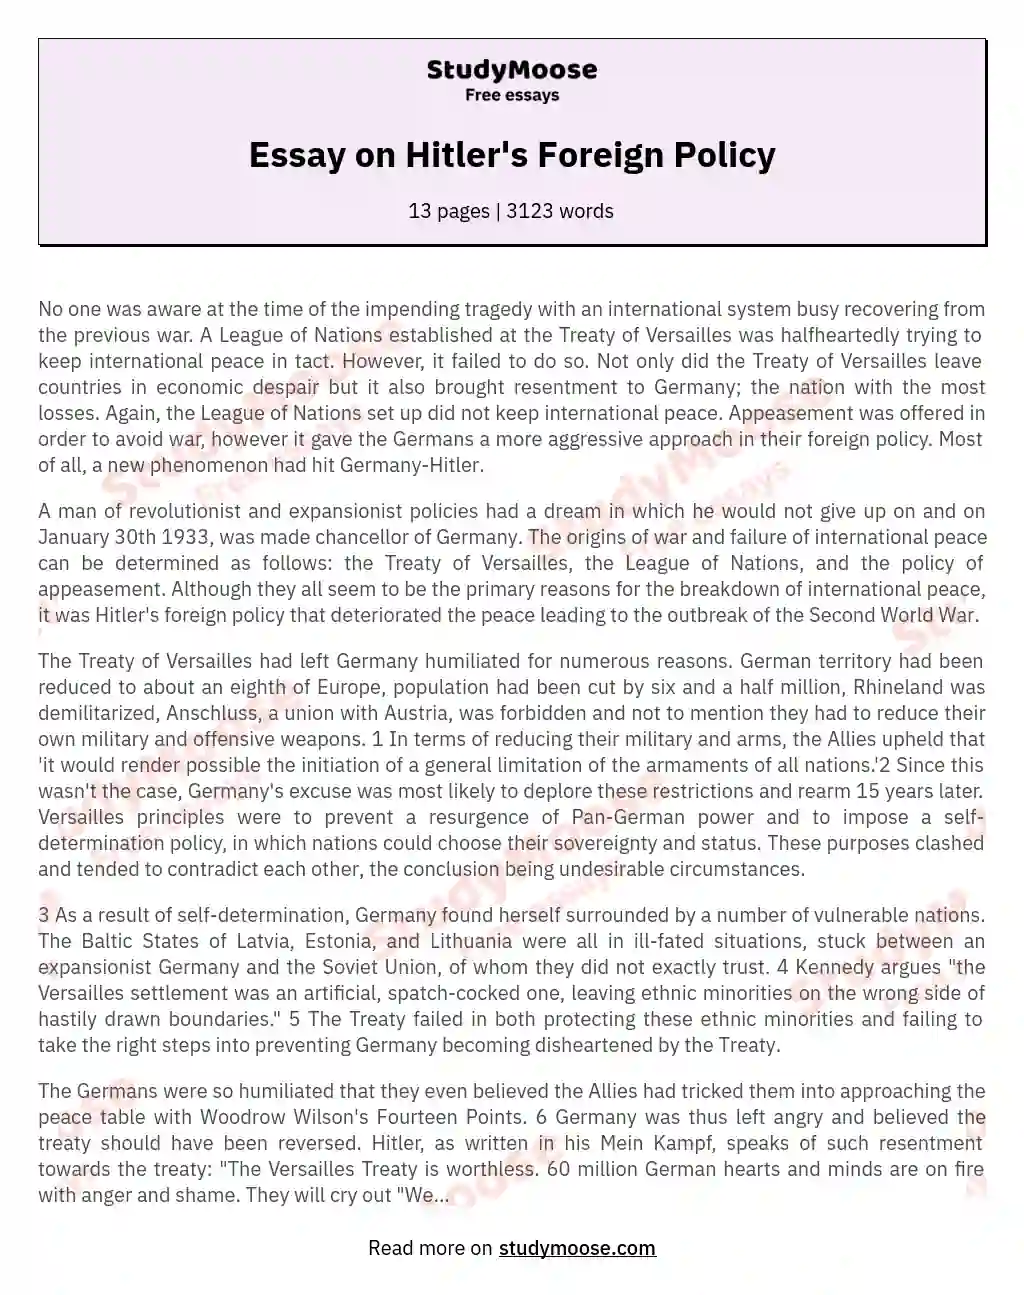 Essay on Hitler's Foreign Policy essay